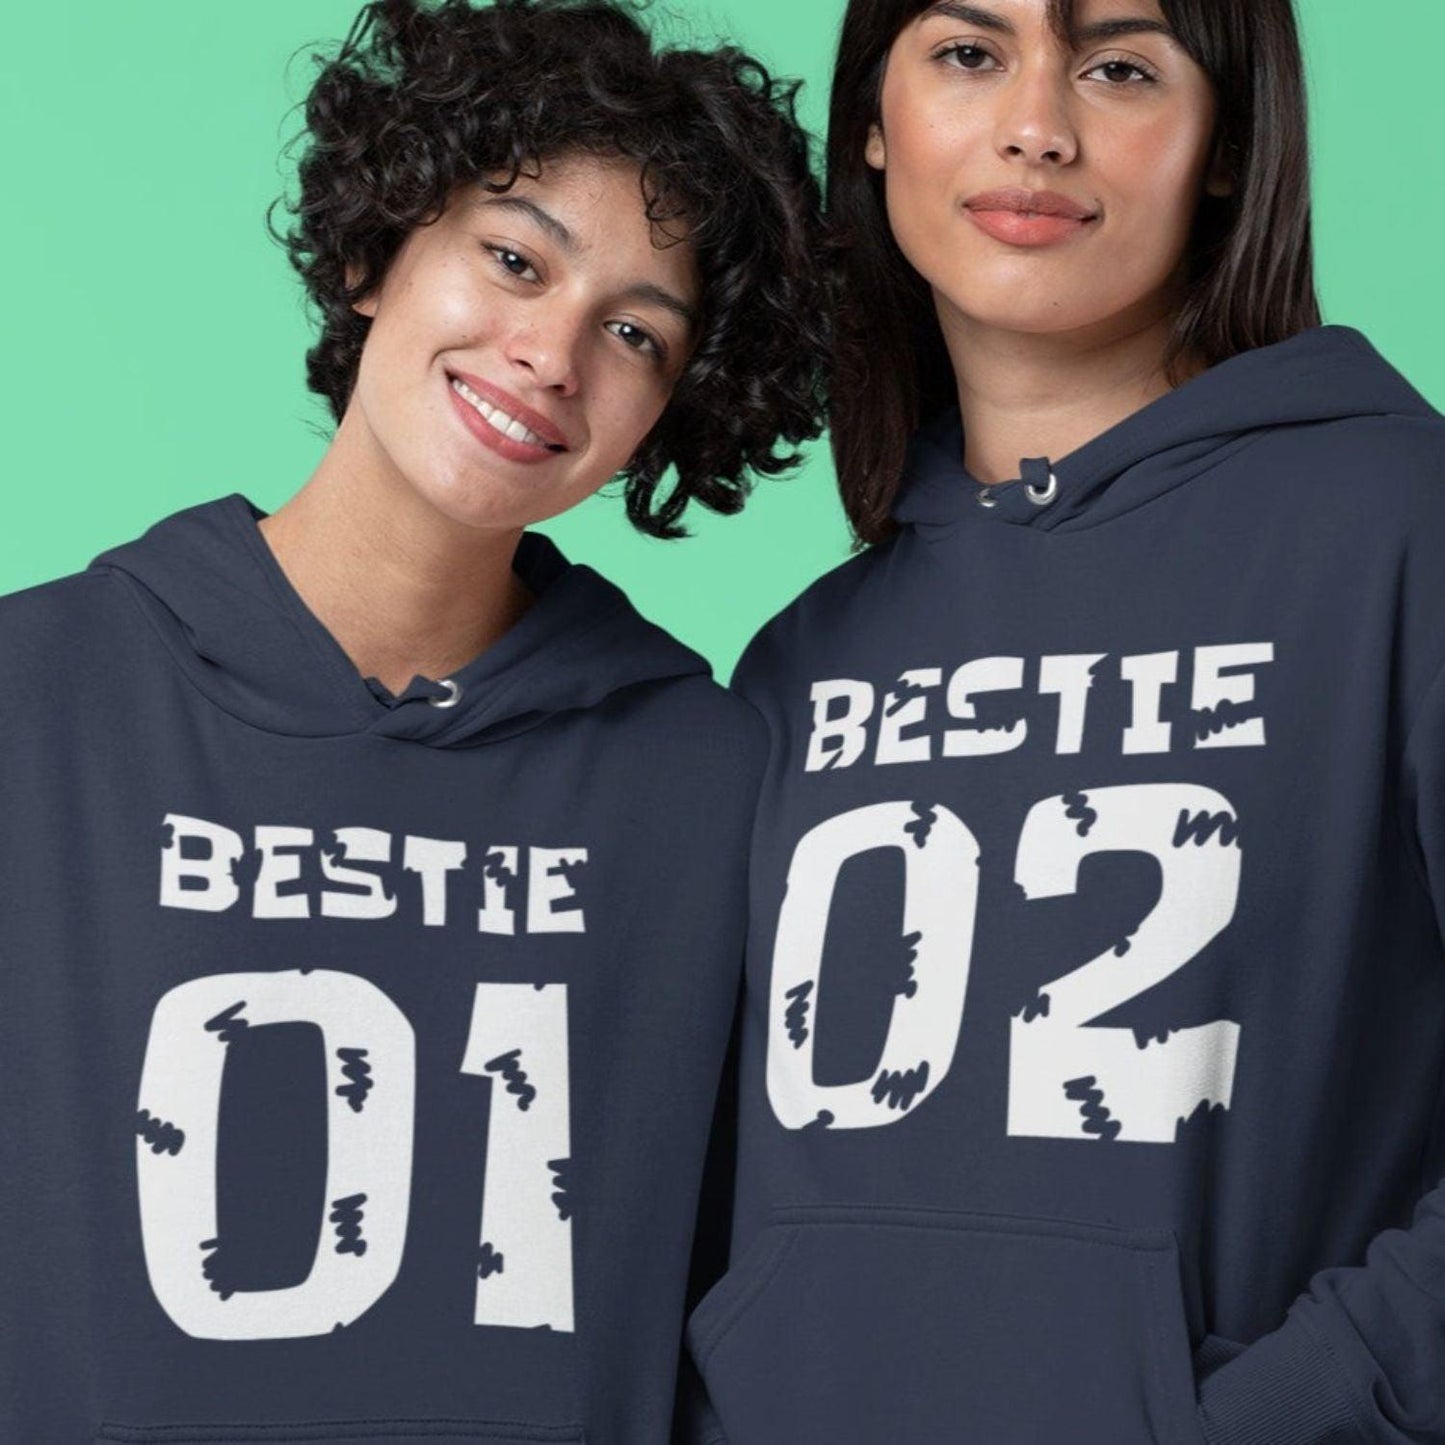 Bestie 01 & 02 Matching Outfits - Comfy BFF Sets - Perfect Best Friend Gifts - 4Lovebirds